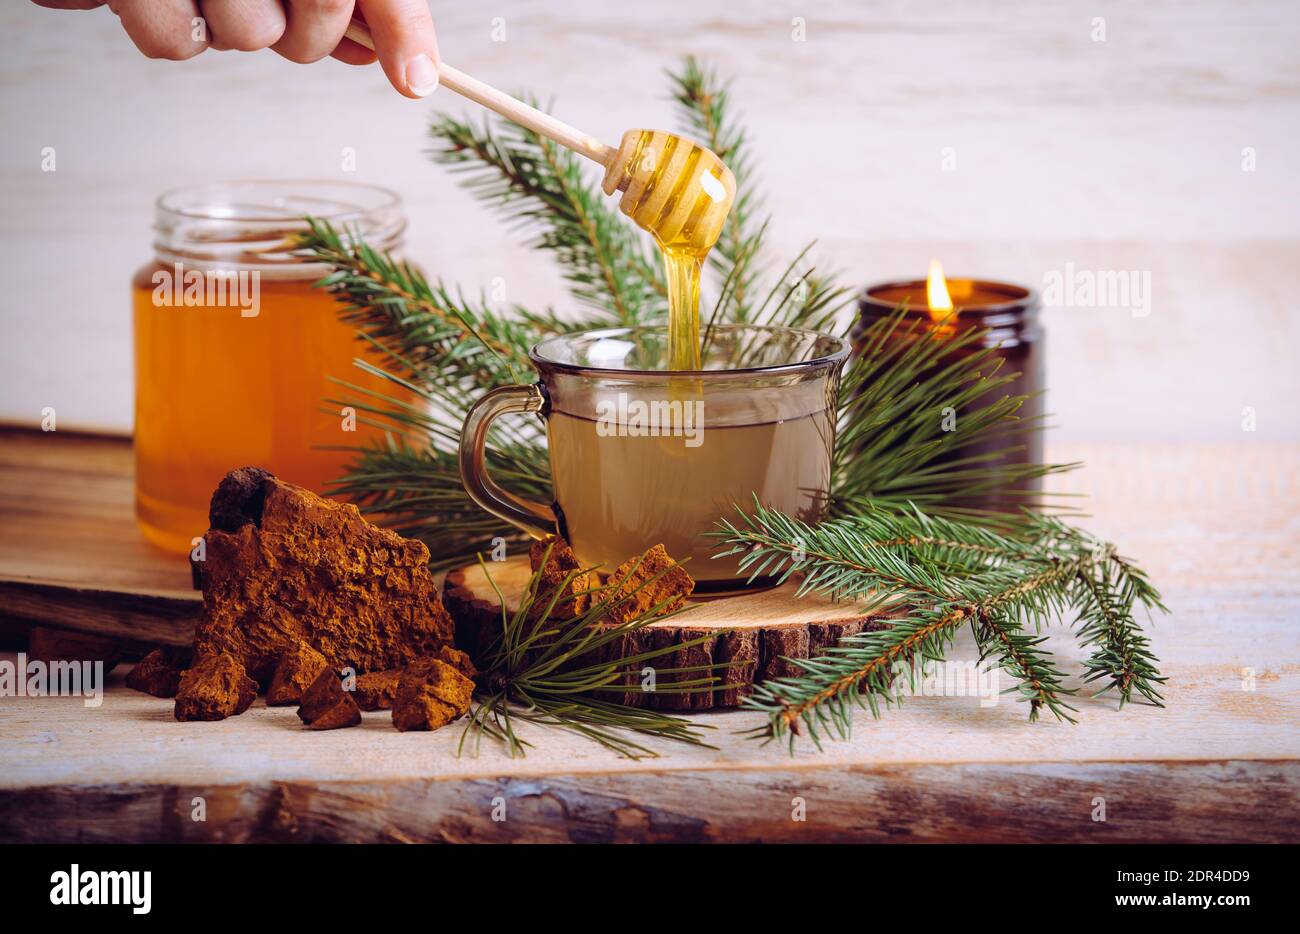 Spruce and pine needle tea with chaga mushroom Inonotus obliquus powder and honey. Tree branches and pieces of Chaga for decoration. Indoors home. Stock Photo